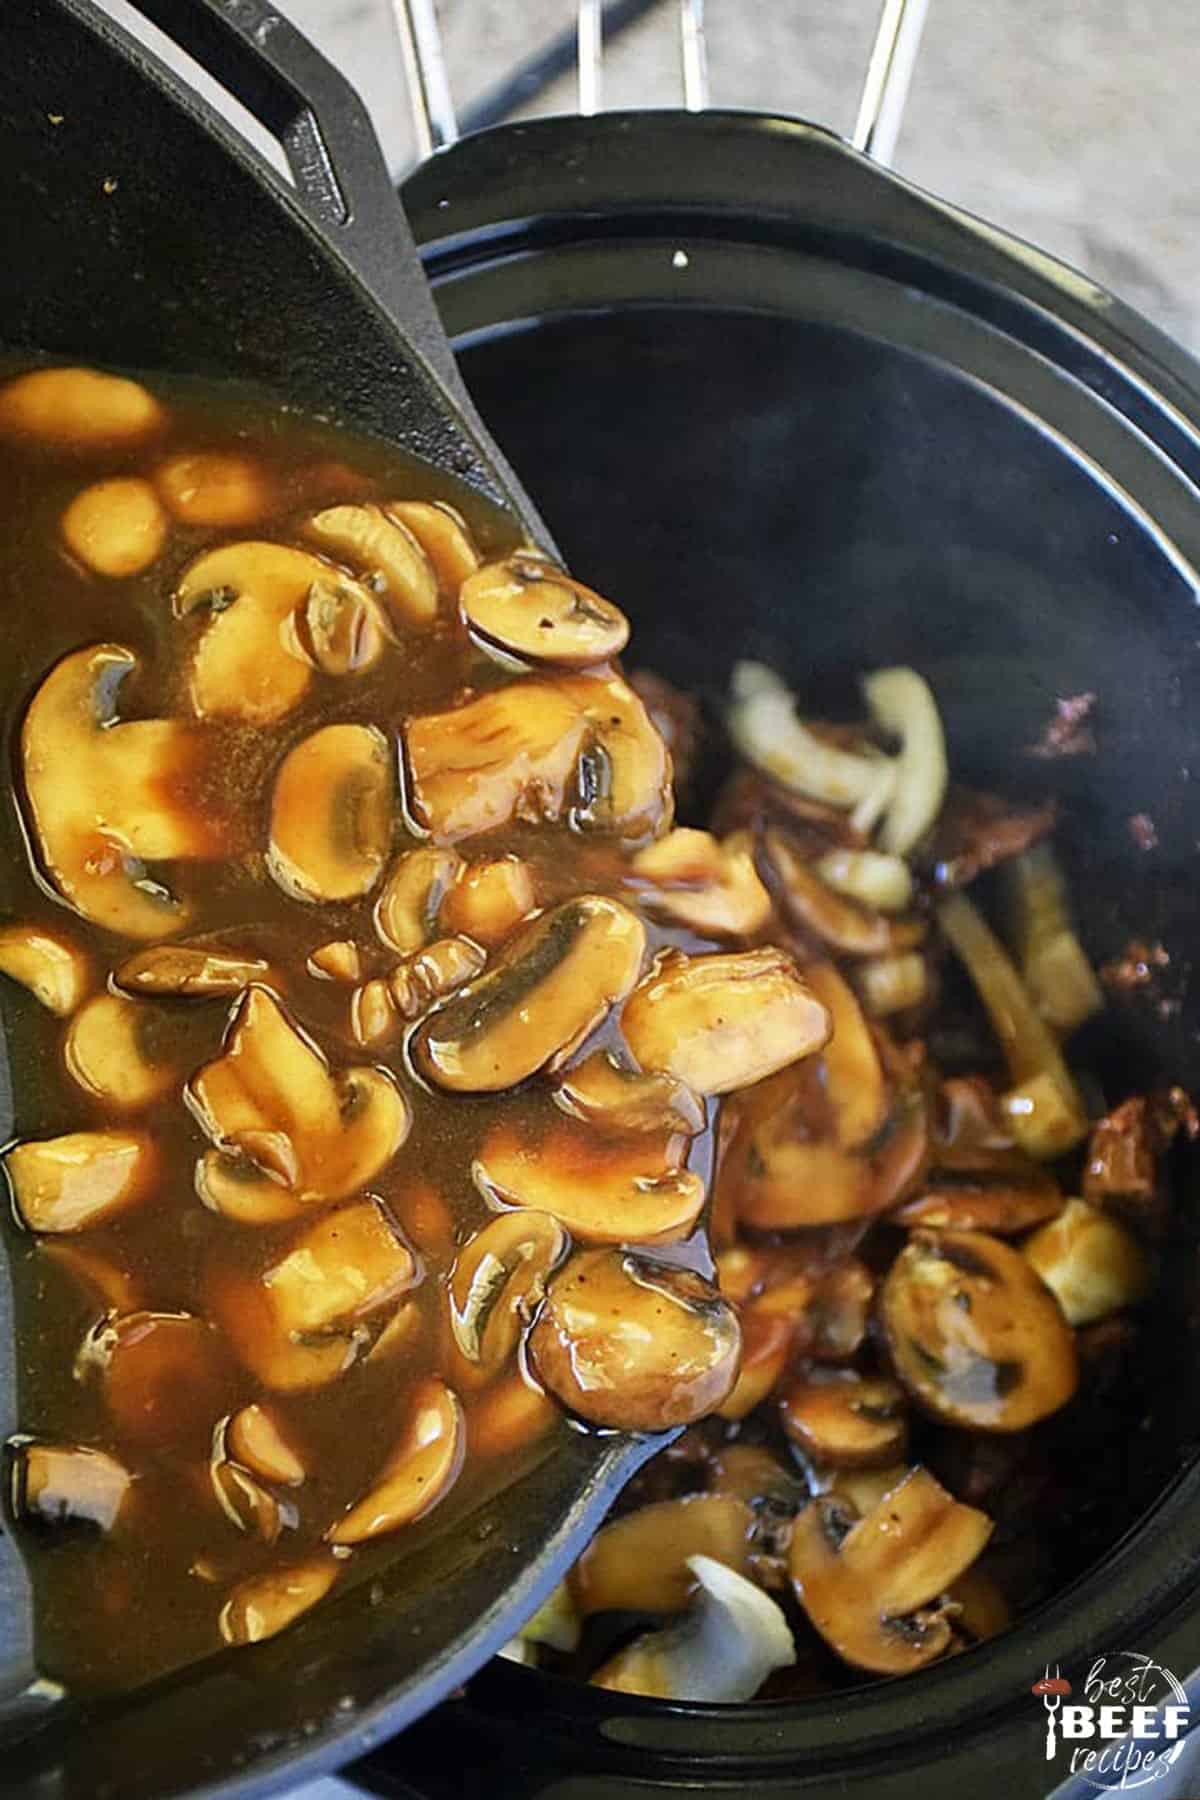 Pouring the mushroom gravy into the slow cooker with the beef tips